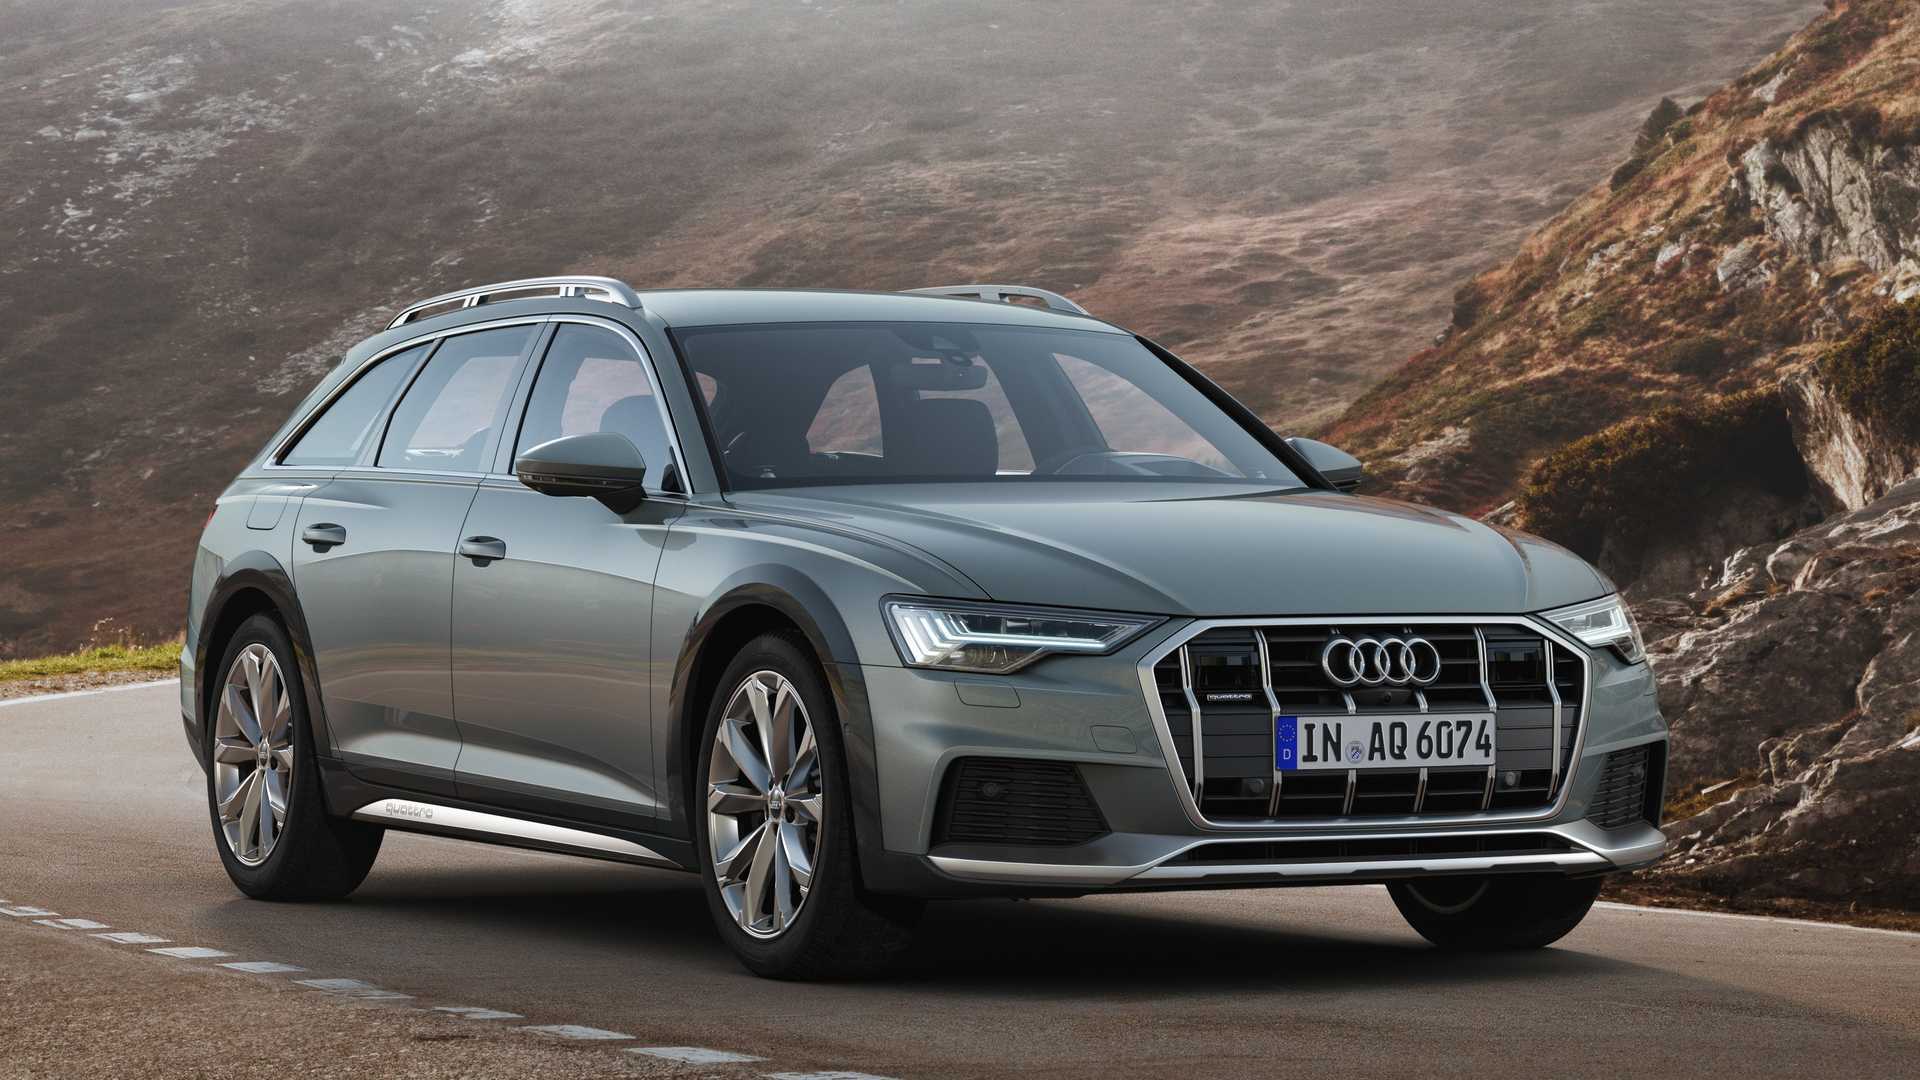 Audi A6 Allroad And RS Q3 Might Make It To The U.S.